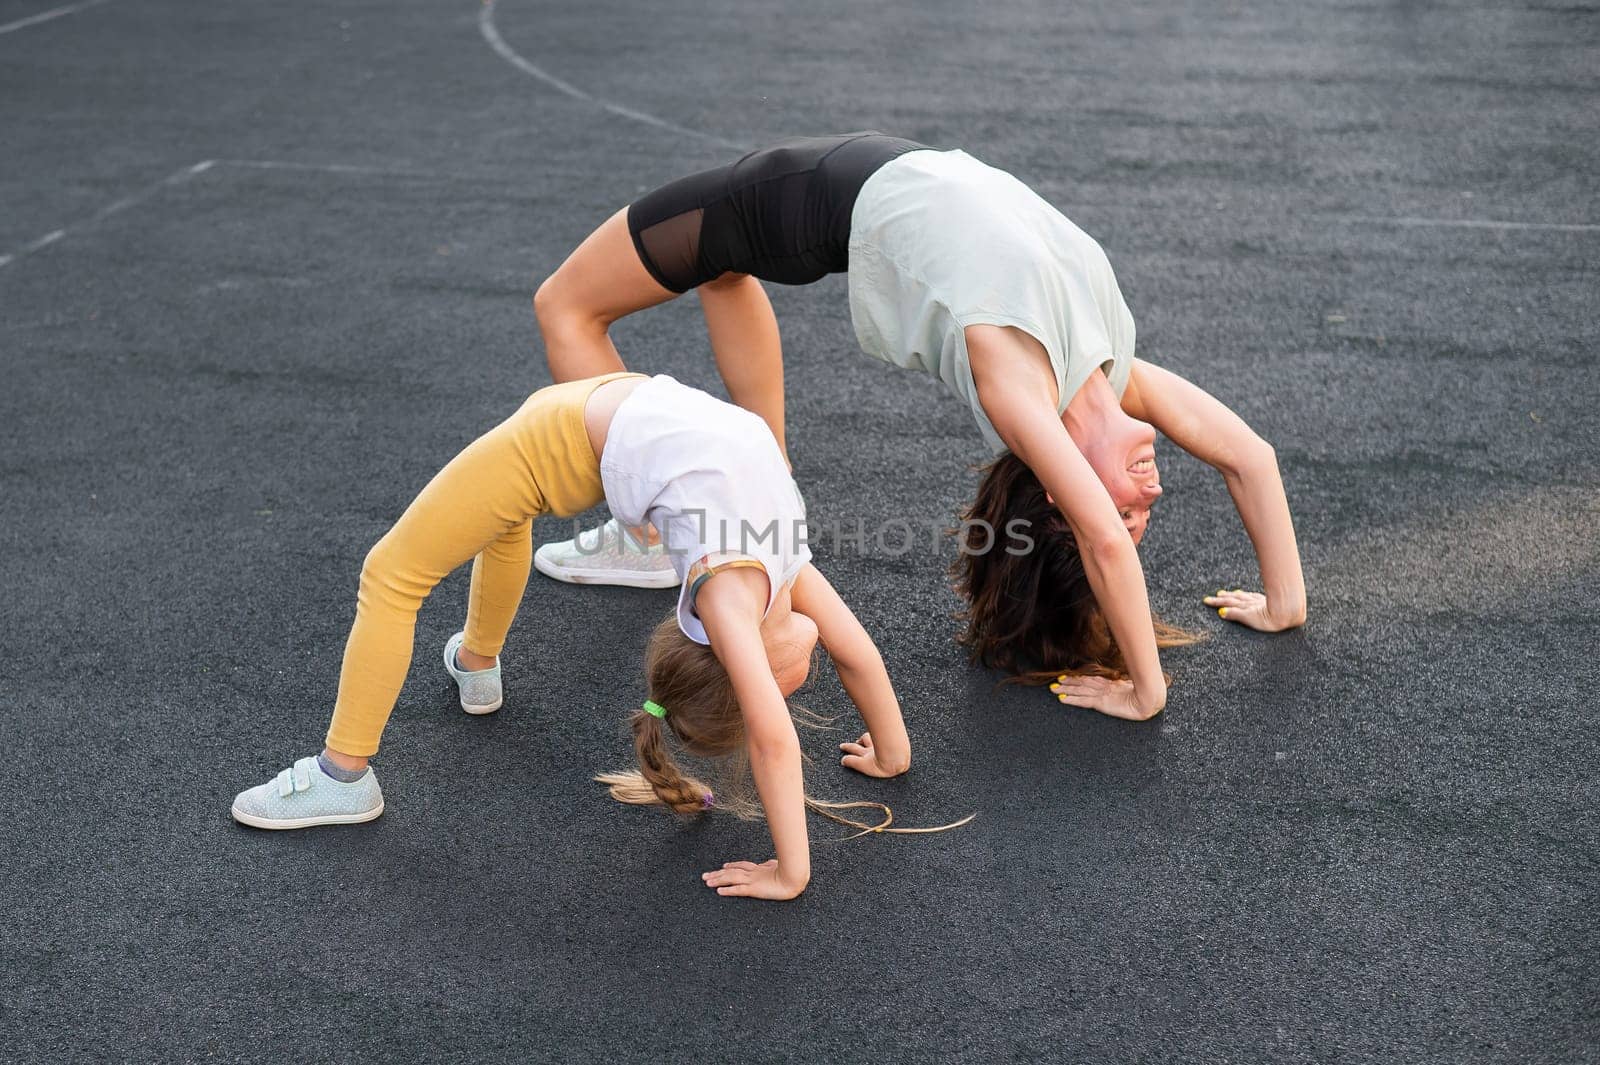 A little girl and her mom do a bridge exercise at the outdoor sports ground. by mrwed54